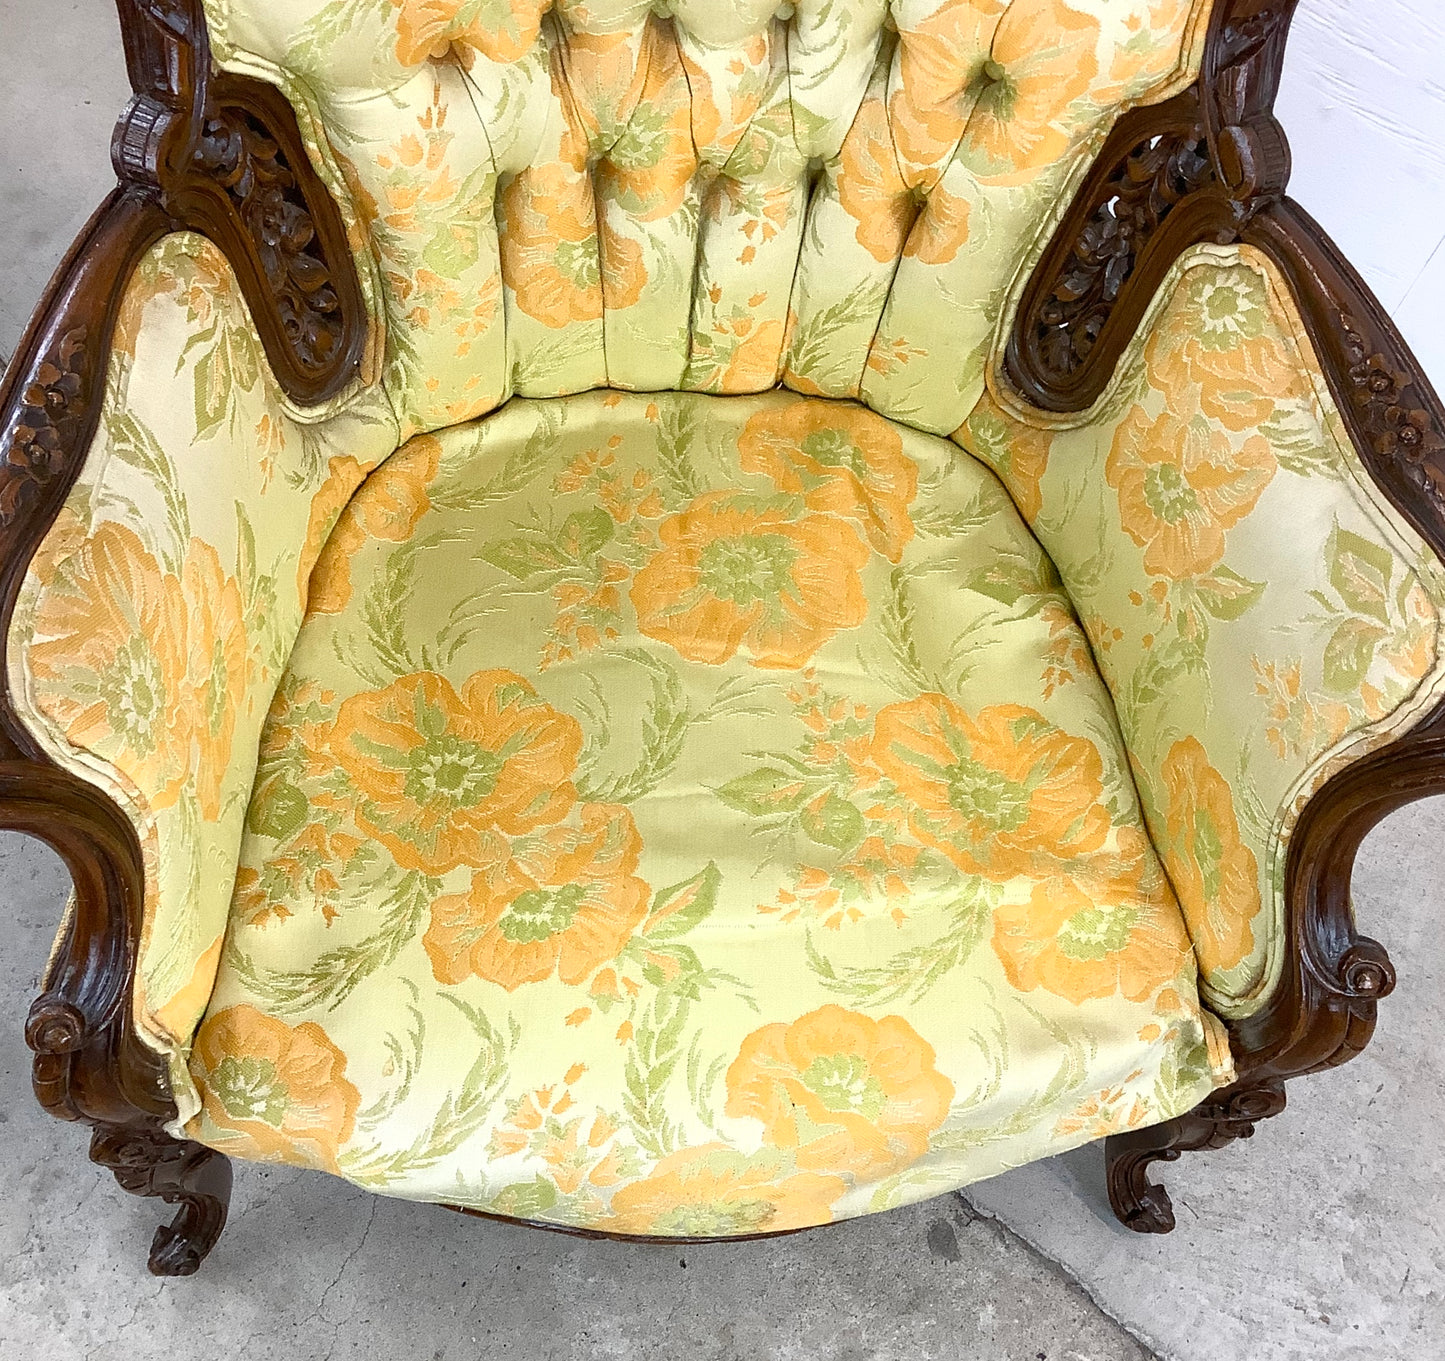 Vintage Louis XV Style Wingback Armchair